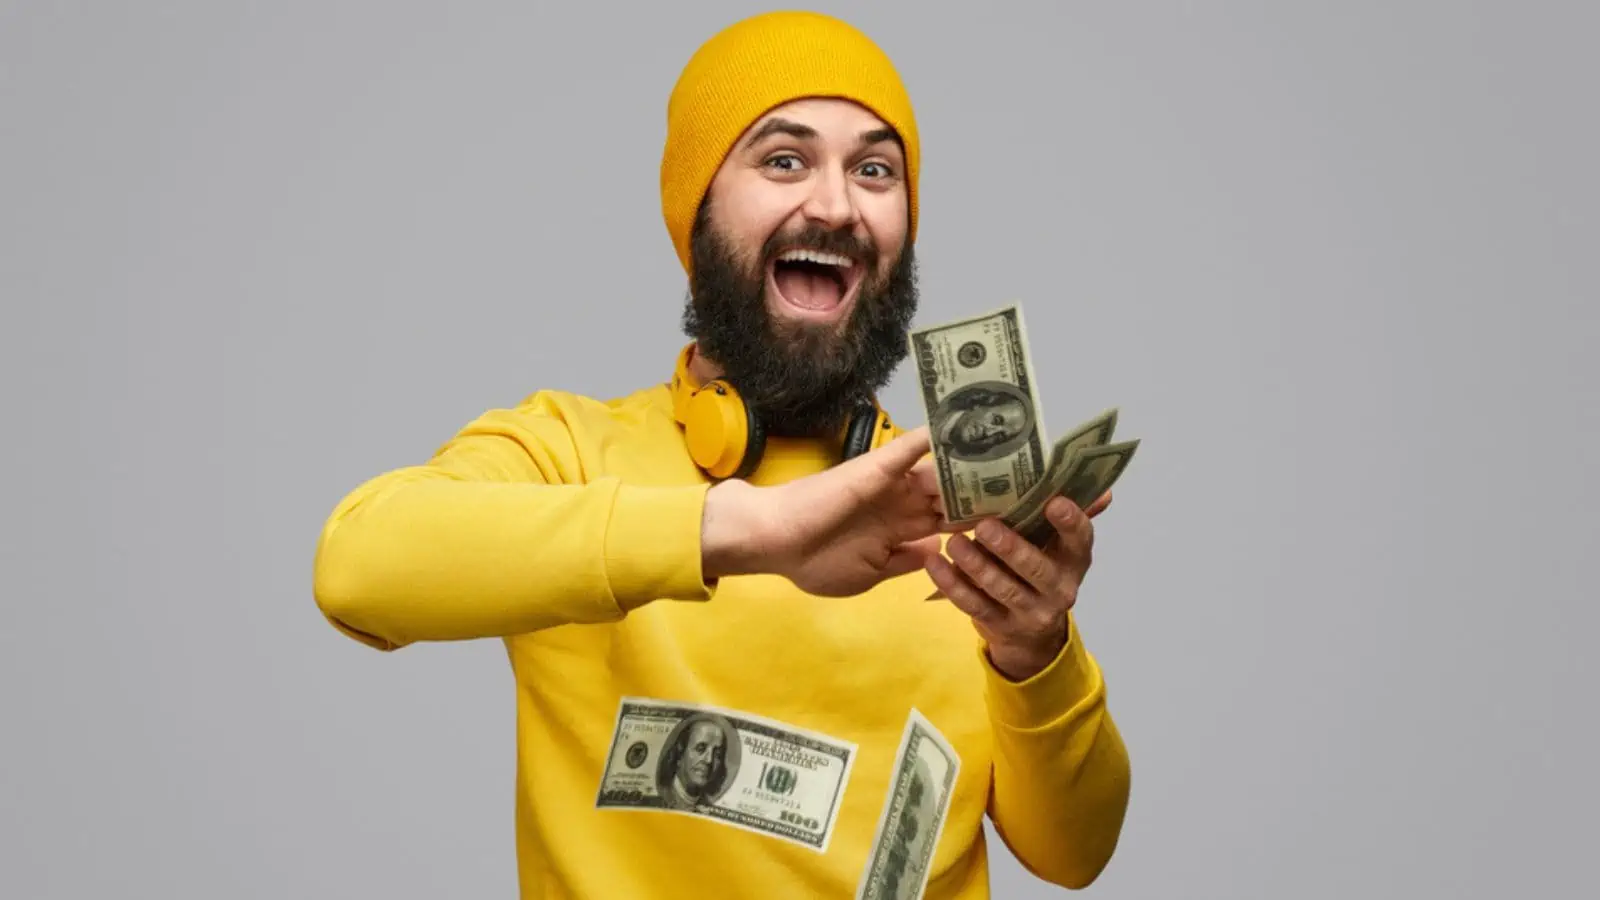 Man wasting money wearing yellow isolated in gray